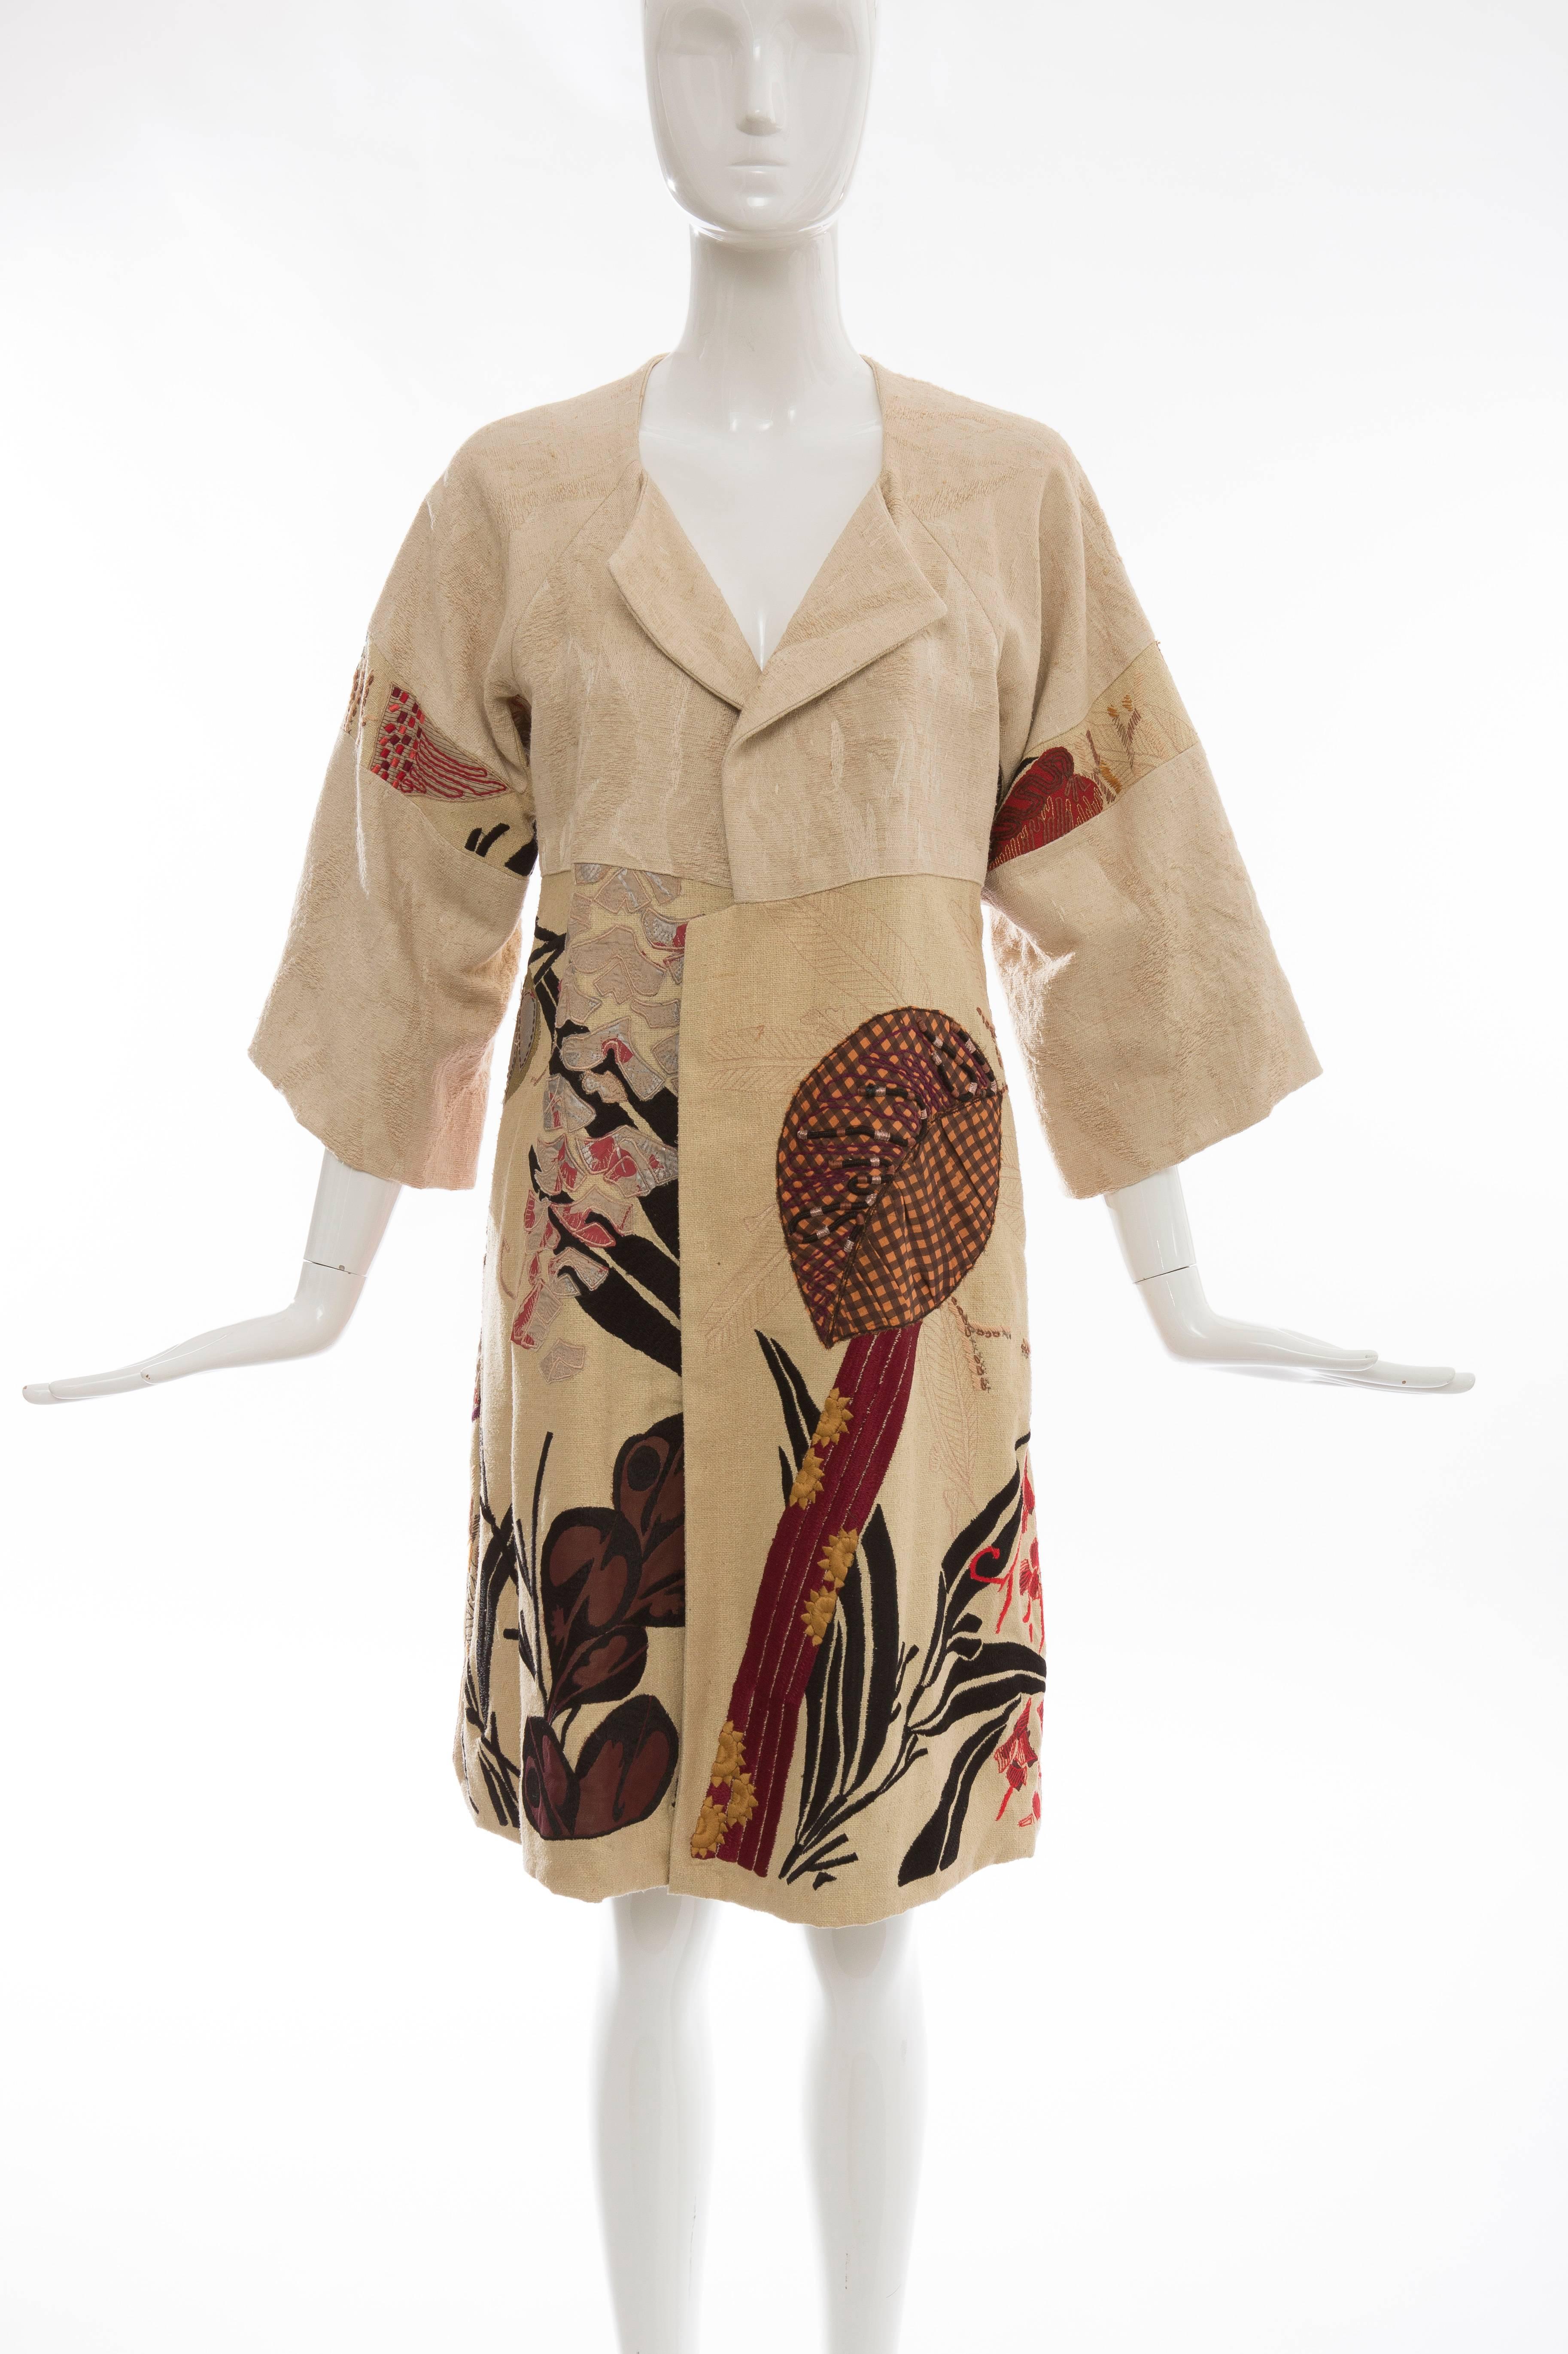 Dries Van Noten, Spring-Summer 2006, silk-cotton embroidered patchwork coat with open front, dual welt pockets, single pleat at center back and tonal stitching throughout.

Size: Small
Bust: 32
Waist: 30
Shoulder: 15
Length: 38
Sleeve: 25